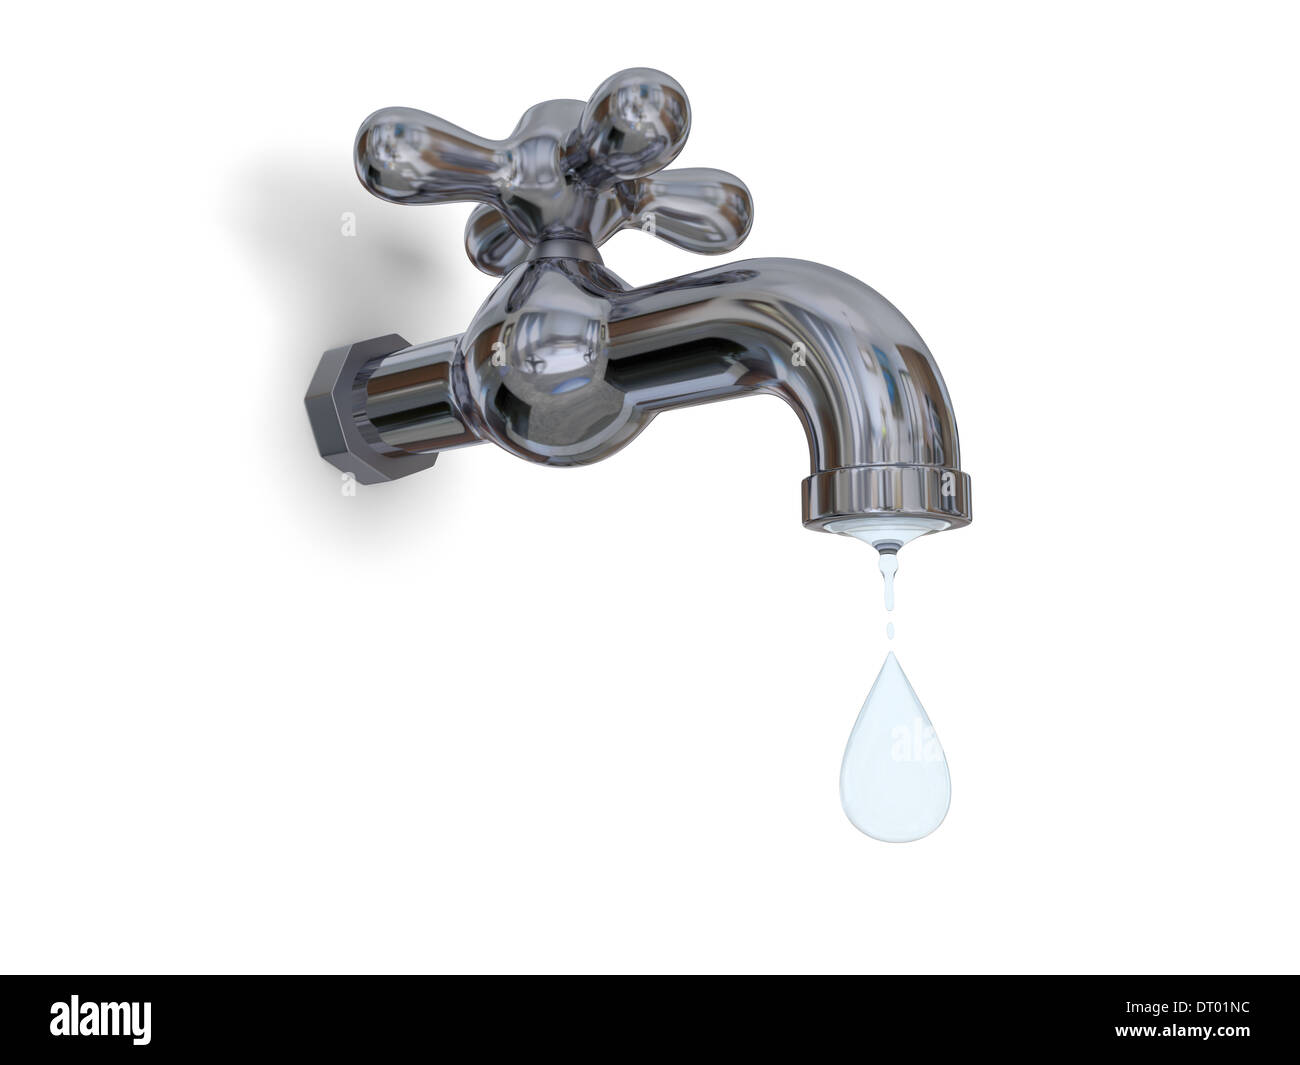 Illustration of water tap dripping with water drop isolated on white background Stock Photo